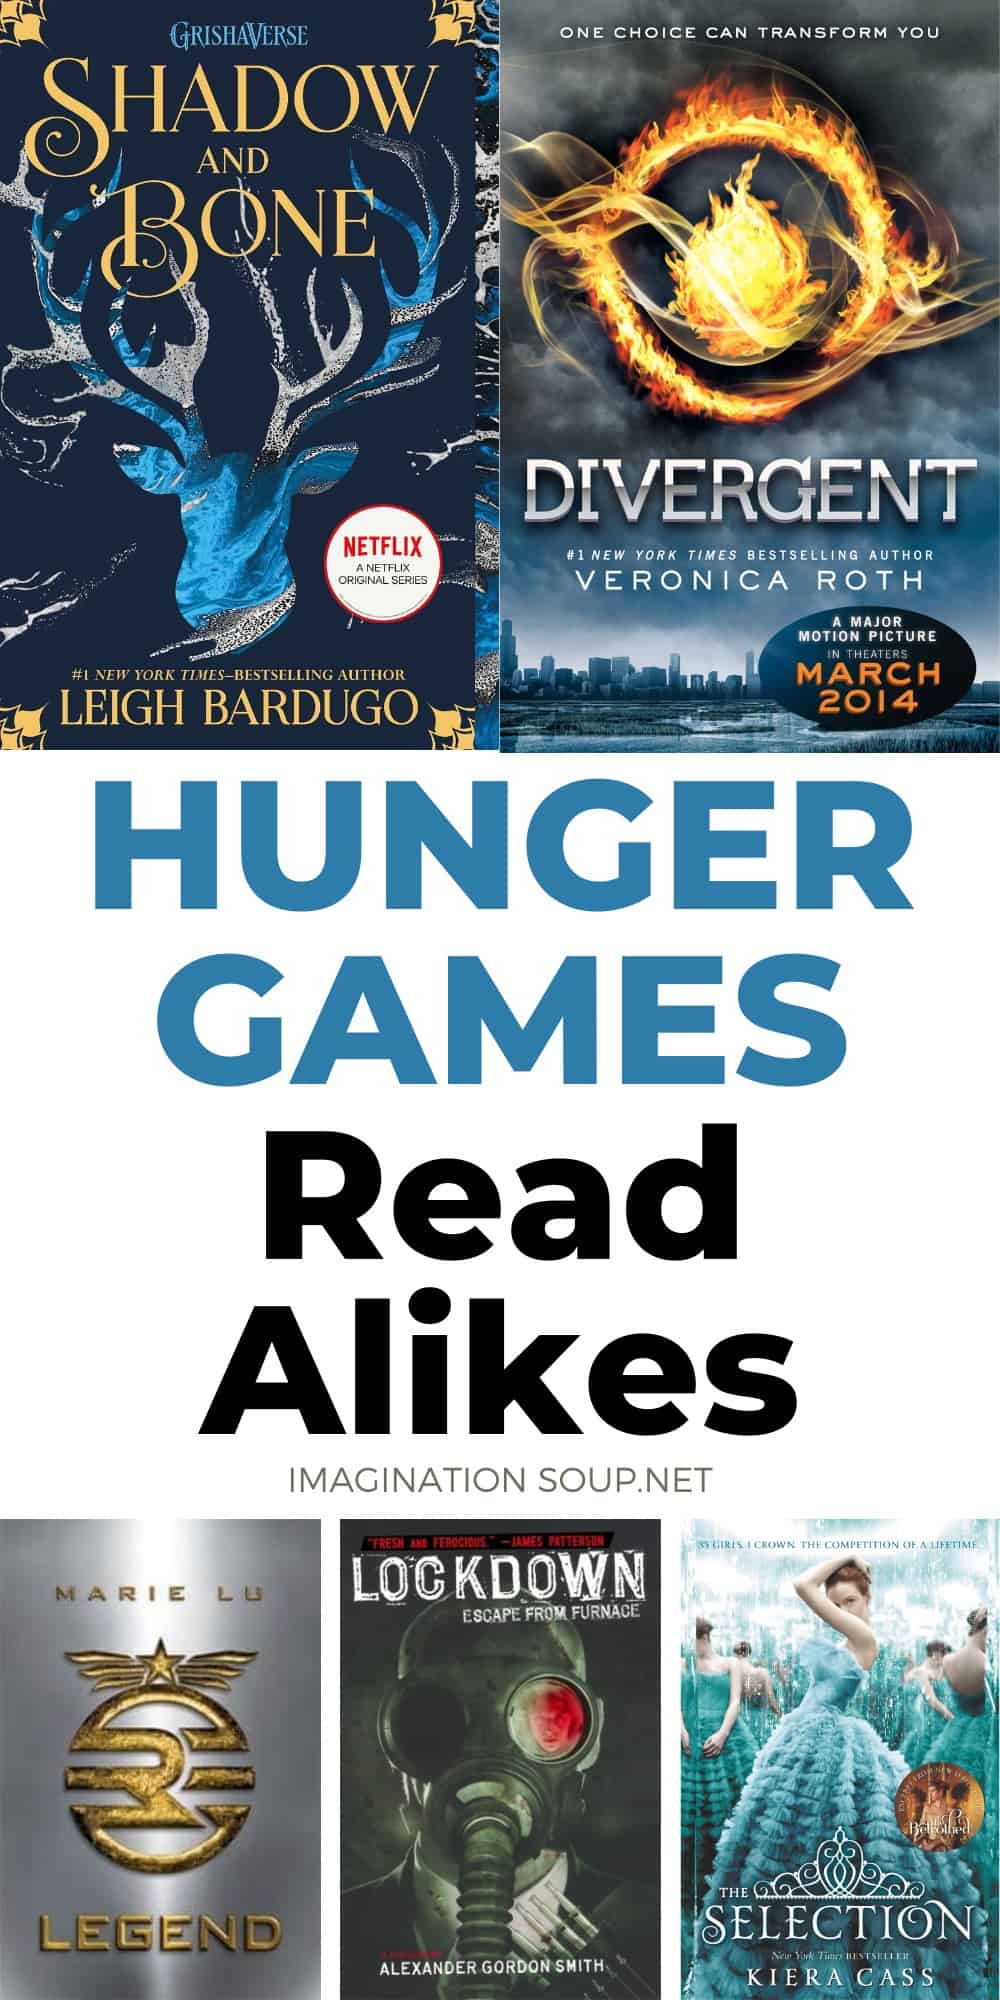 Want to find more good books like the Hunger Games? It's been several years since the popularity of the books but I thought you might be needing some good Hunger Games read alikes to help you find your next favorite, compelling, heart-pounding dystopian novel.